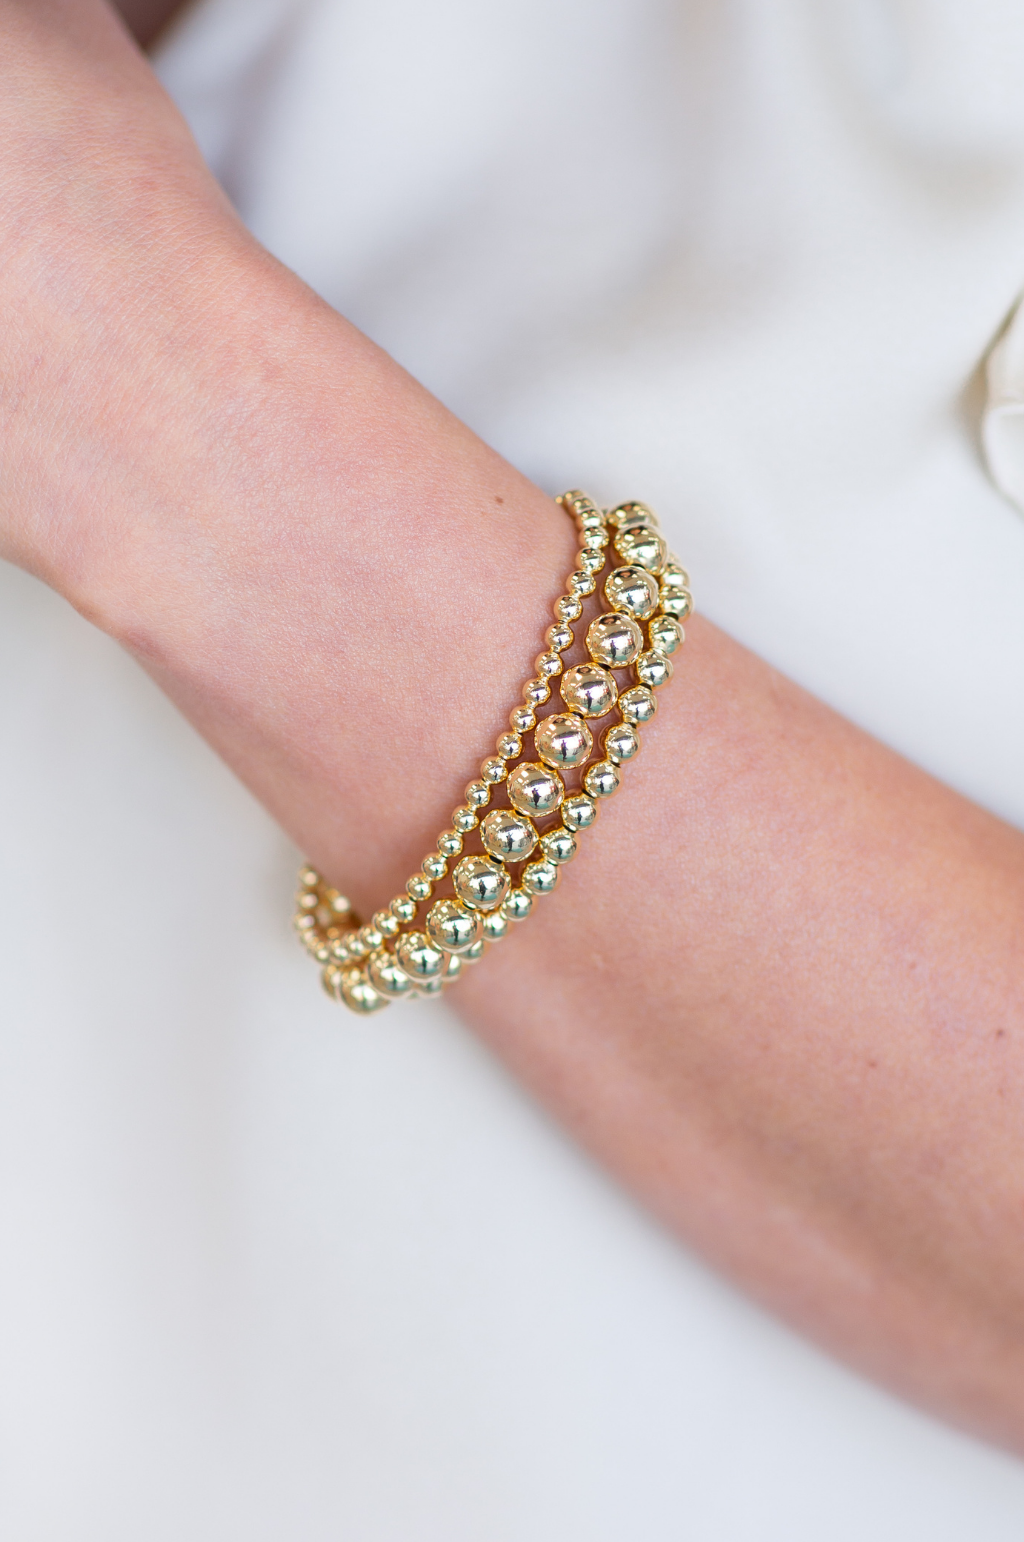 Gold Filled Ball Bracelet by Annie Claire Designs - SoSis